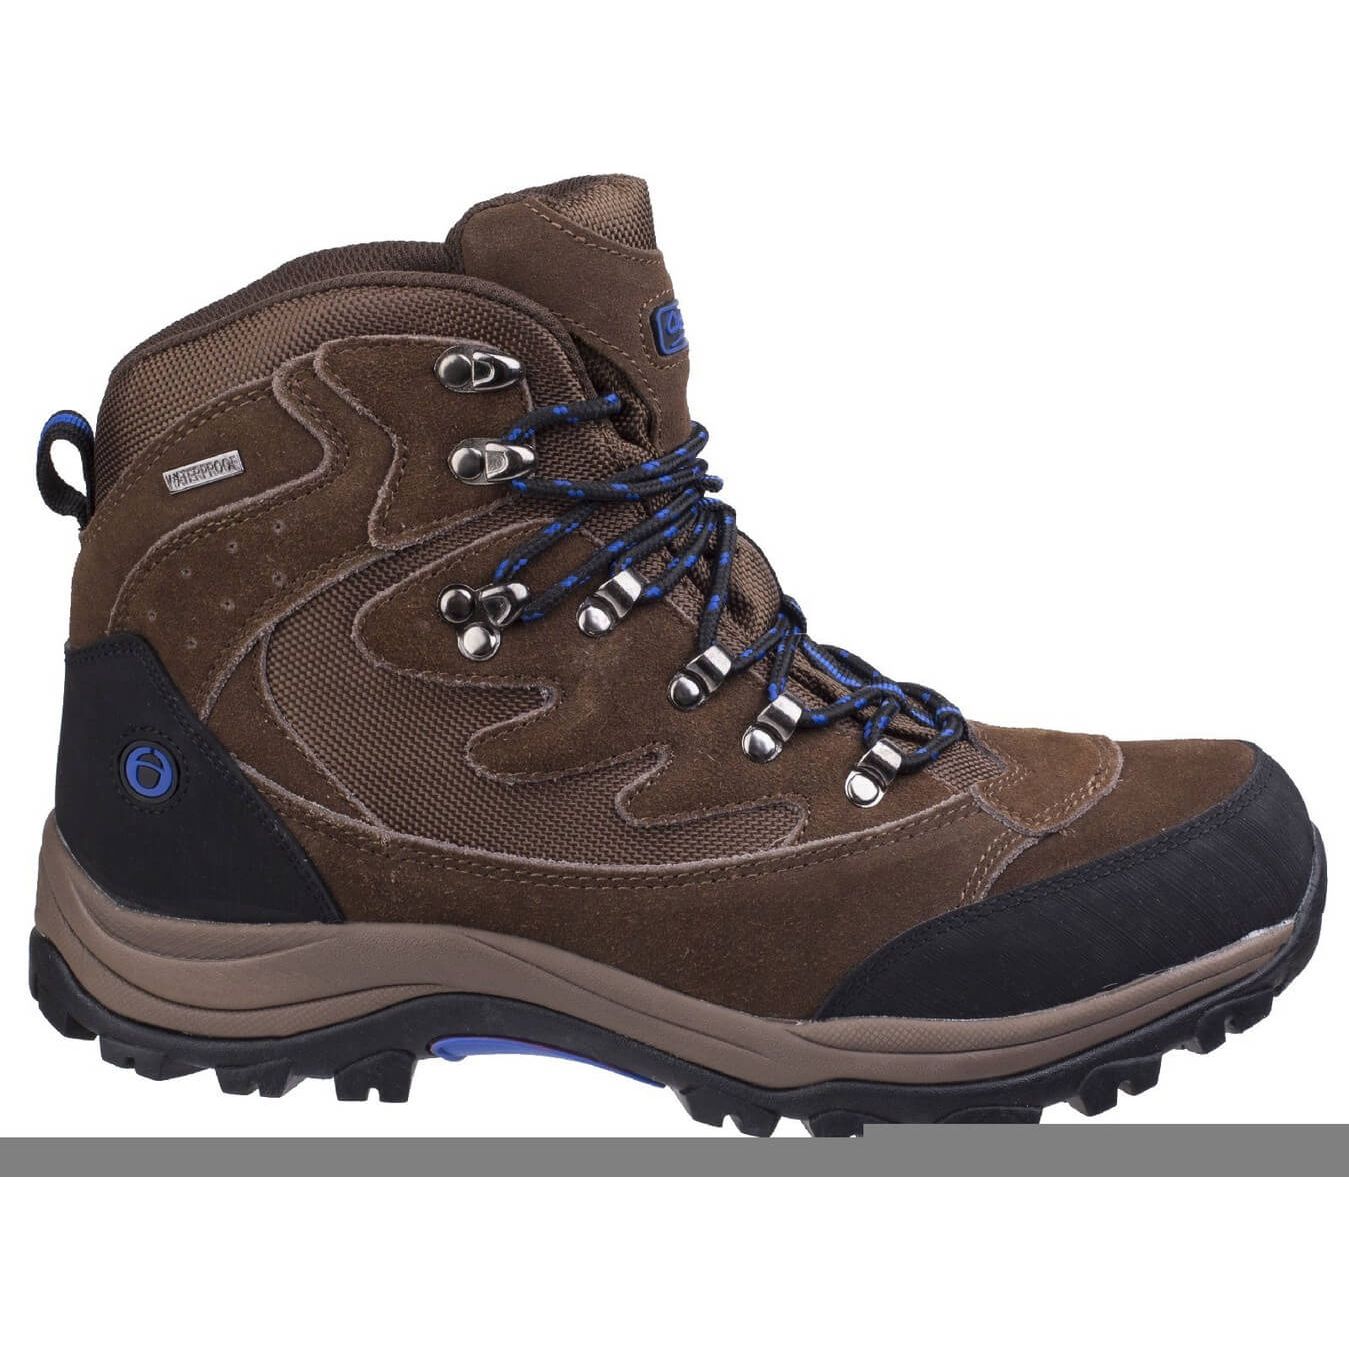 Cotswold Oxerton Waterproof Hiking Shoes-Brown-4